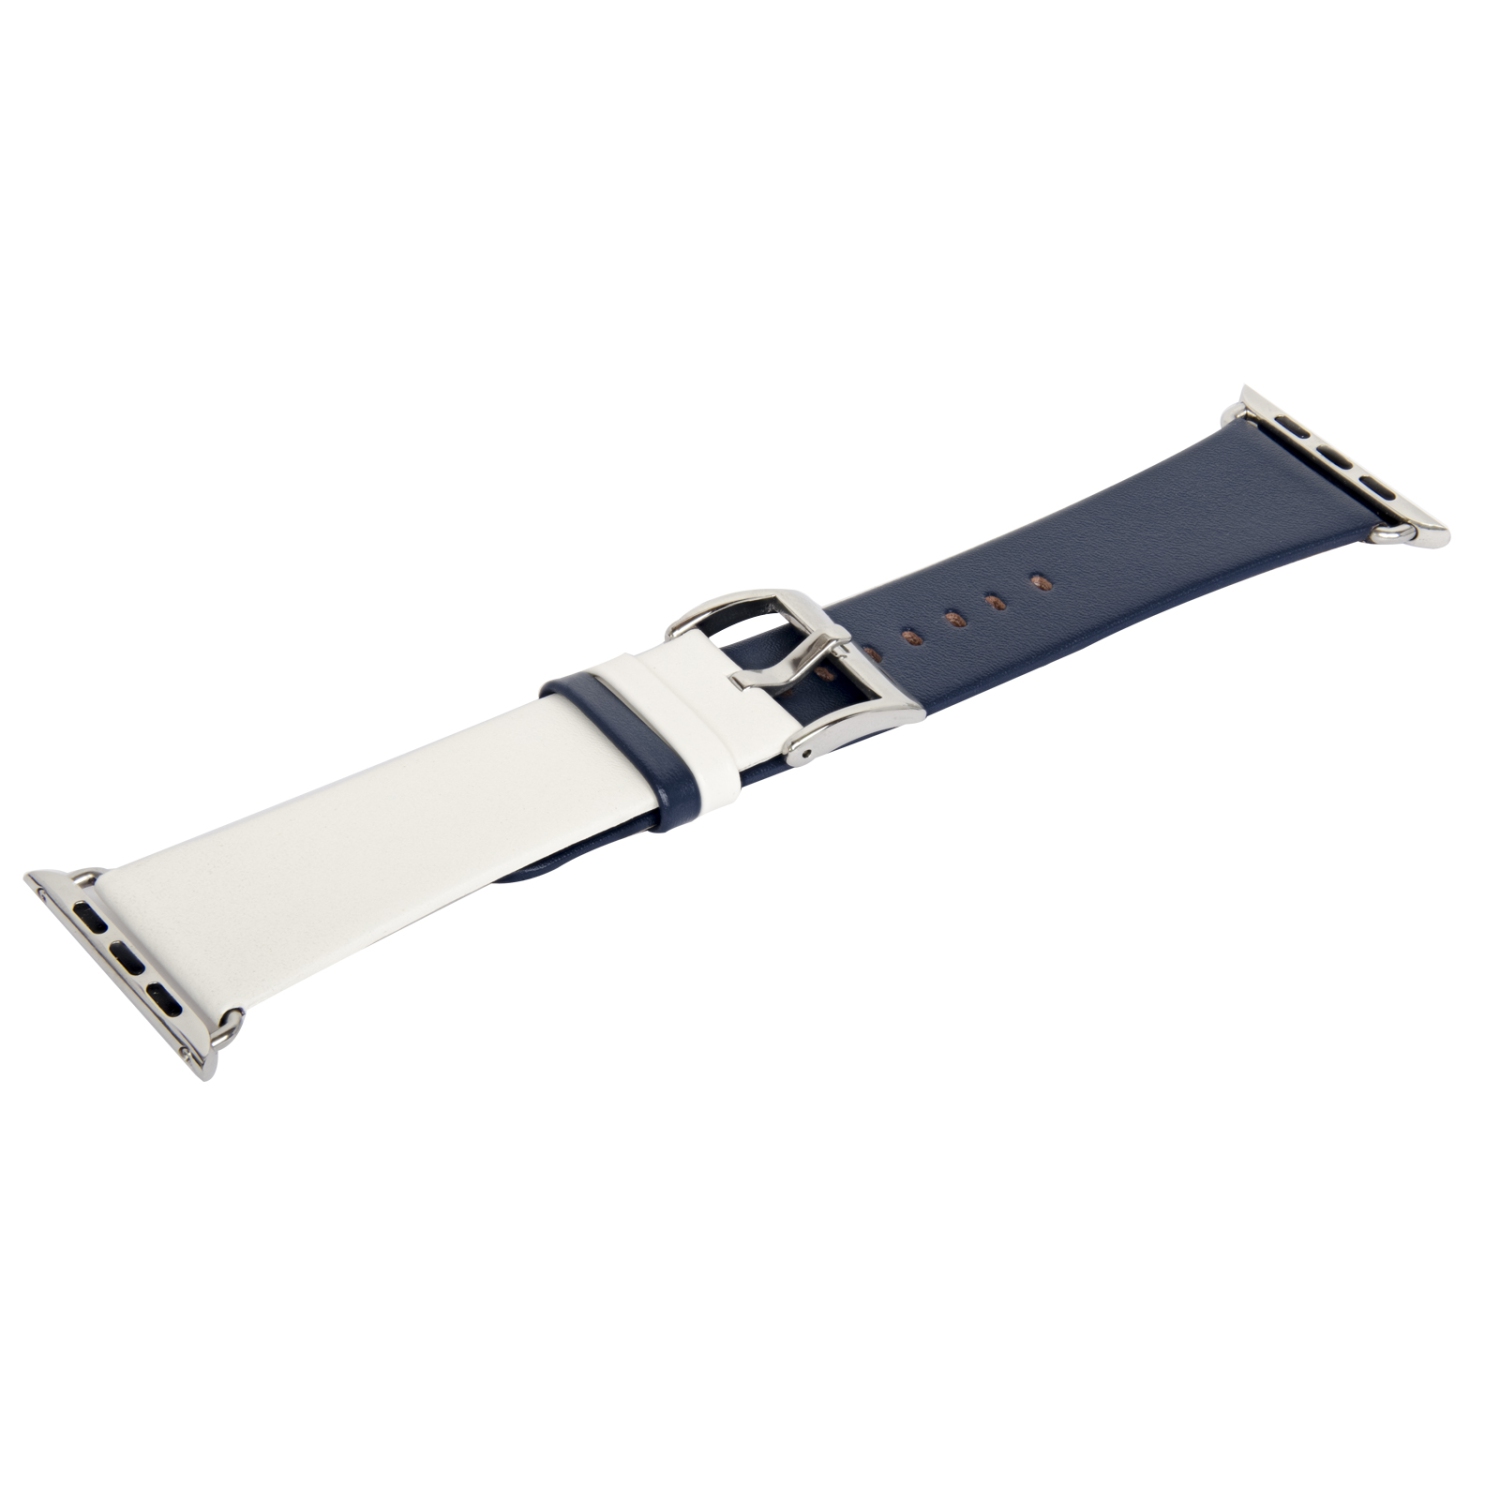 Rubber Skin Replacement Apple Watch Band with Stainless Metal Clasp for iWatch Series 1/2/3/4/5/6/7/8 - 42mm/44mm/45mm - Navy Blue & White